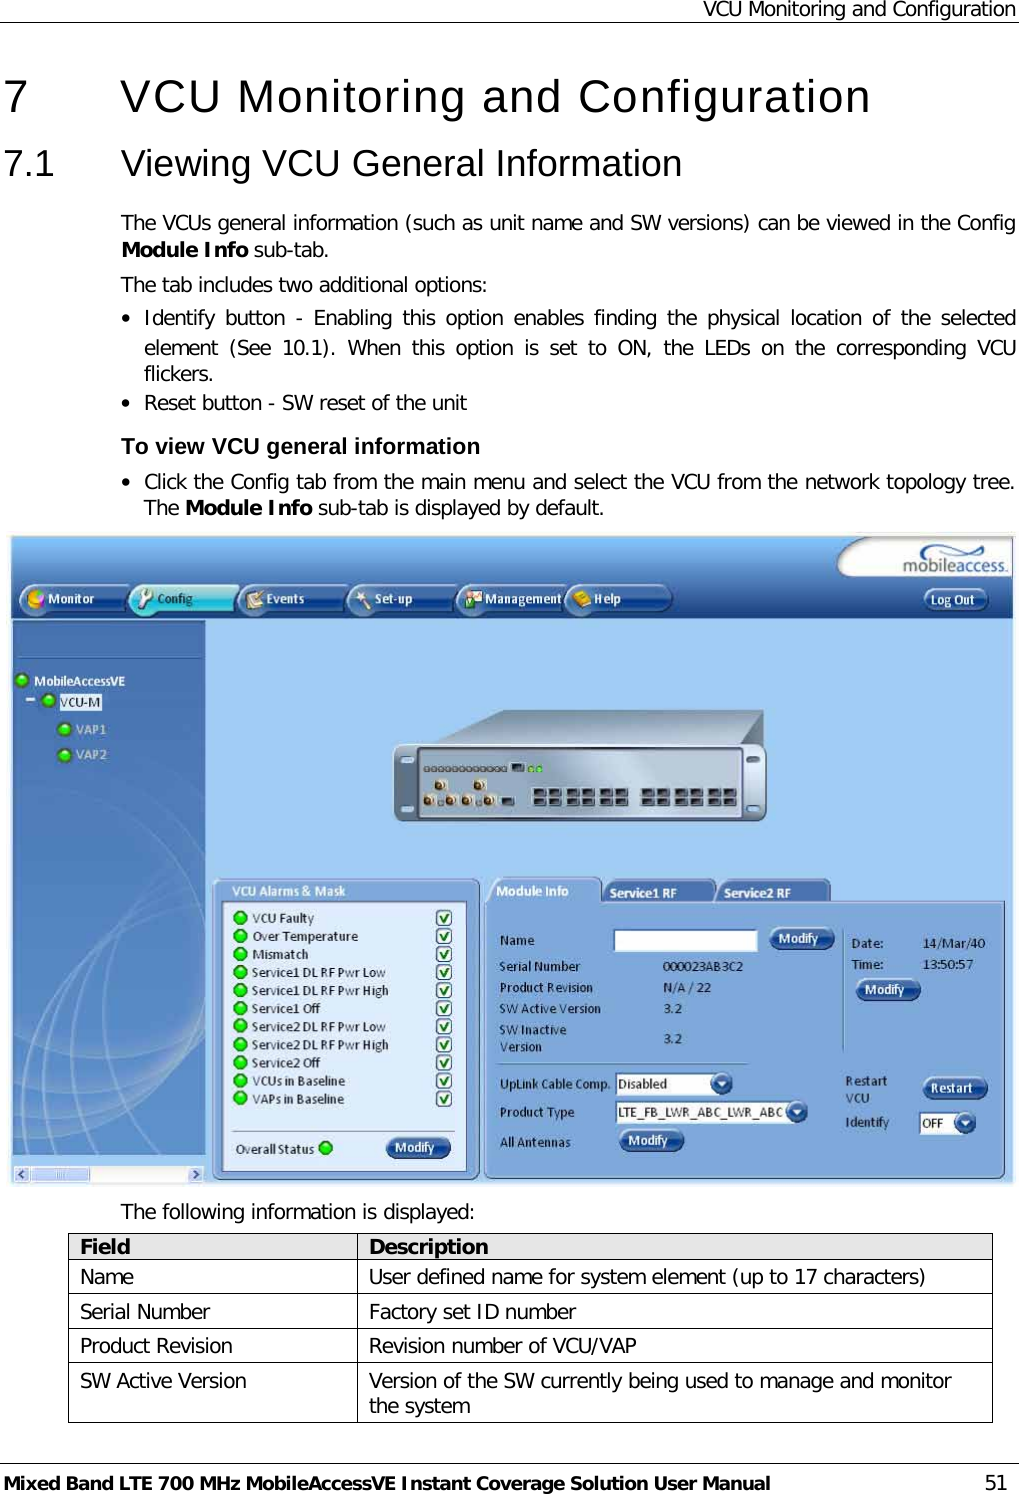 VCU Monitoring and Configuration Mixed Band LTE 700 MHz MobileAccessVE Instant Coverage Solution User Manual  51 7  VCU Monitoring and Configuration  7.1  Viewing VCU General Information The VCUs general information (such as unit name and SW versions) can be viewed in the Config Module Info sub-tab. The tab includes two additional options: • Identify button - Enabling this option enables finding the physical location of the selected element  (See  10.1). When this option is set to ON, the LEDs on the corresponding VCU flickers. • Reset button - SW reset of the unit To view VCU general information • Click the Config tab from the main menu and select the VCU from the network topology tree. The Module Info sub-tab is displayed by default.  The following information is displayed: Field Description Name User defined name for system element (up to 17 characters) Serial Number Factory set ID number Product Revision Revision number of VCU/VAP SW Active Version Version of the SW currently being used to manage and monitor the system 